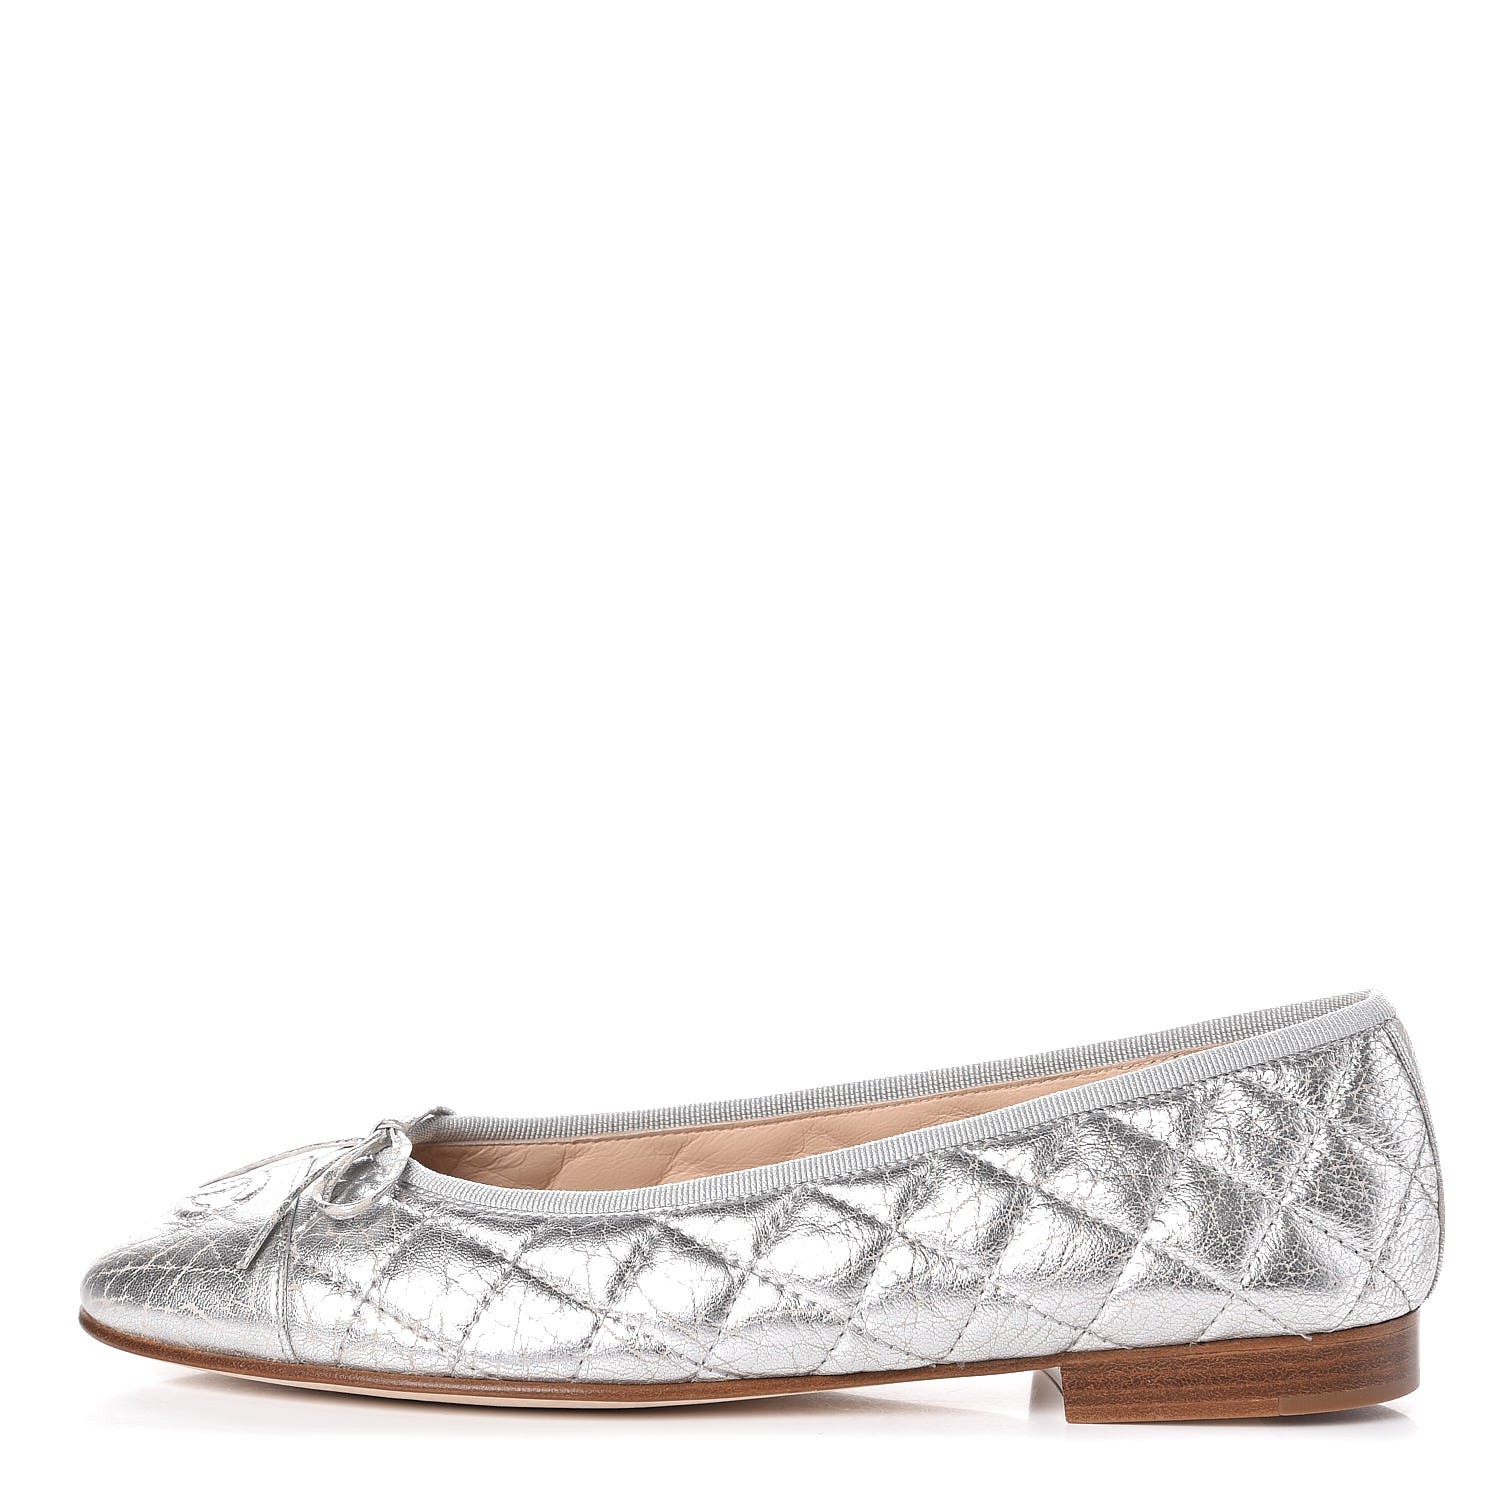 CHANEL Metallic Aged Calfskin Quilted 